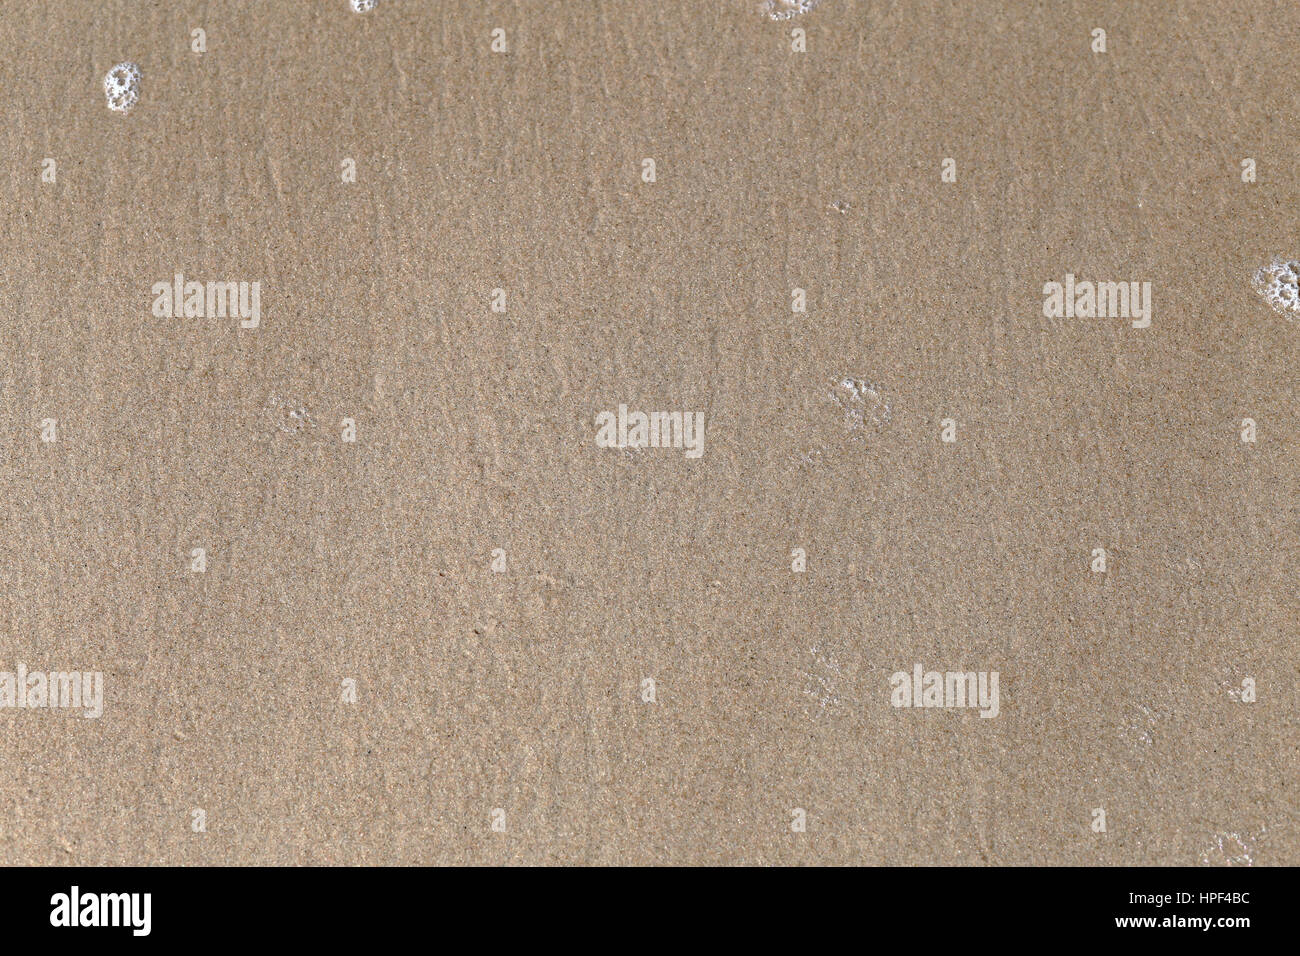 close up brown sea sand background texture Stock Photo